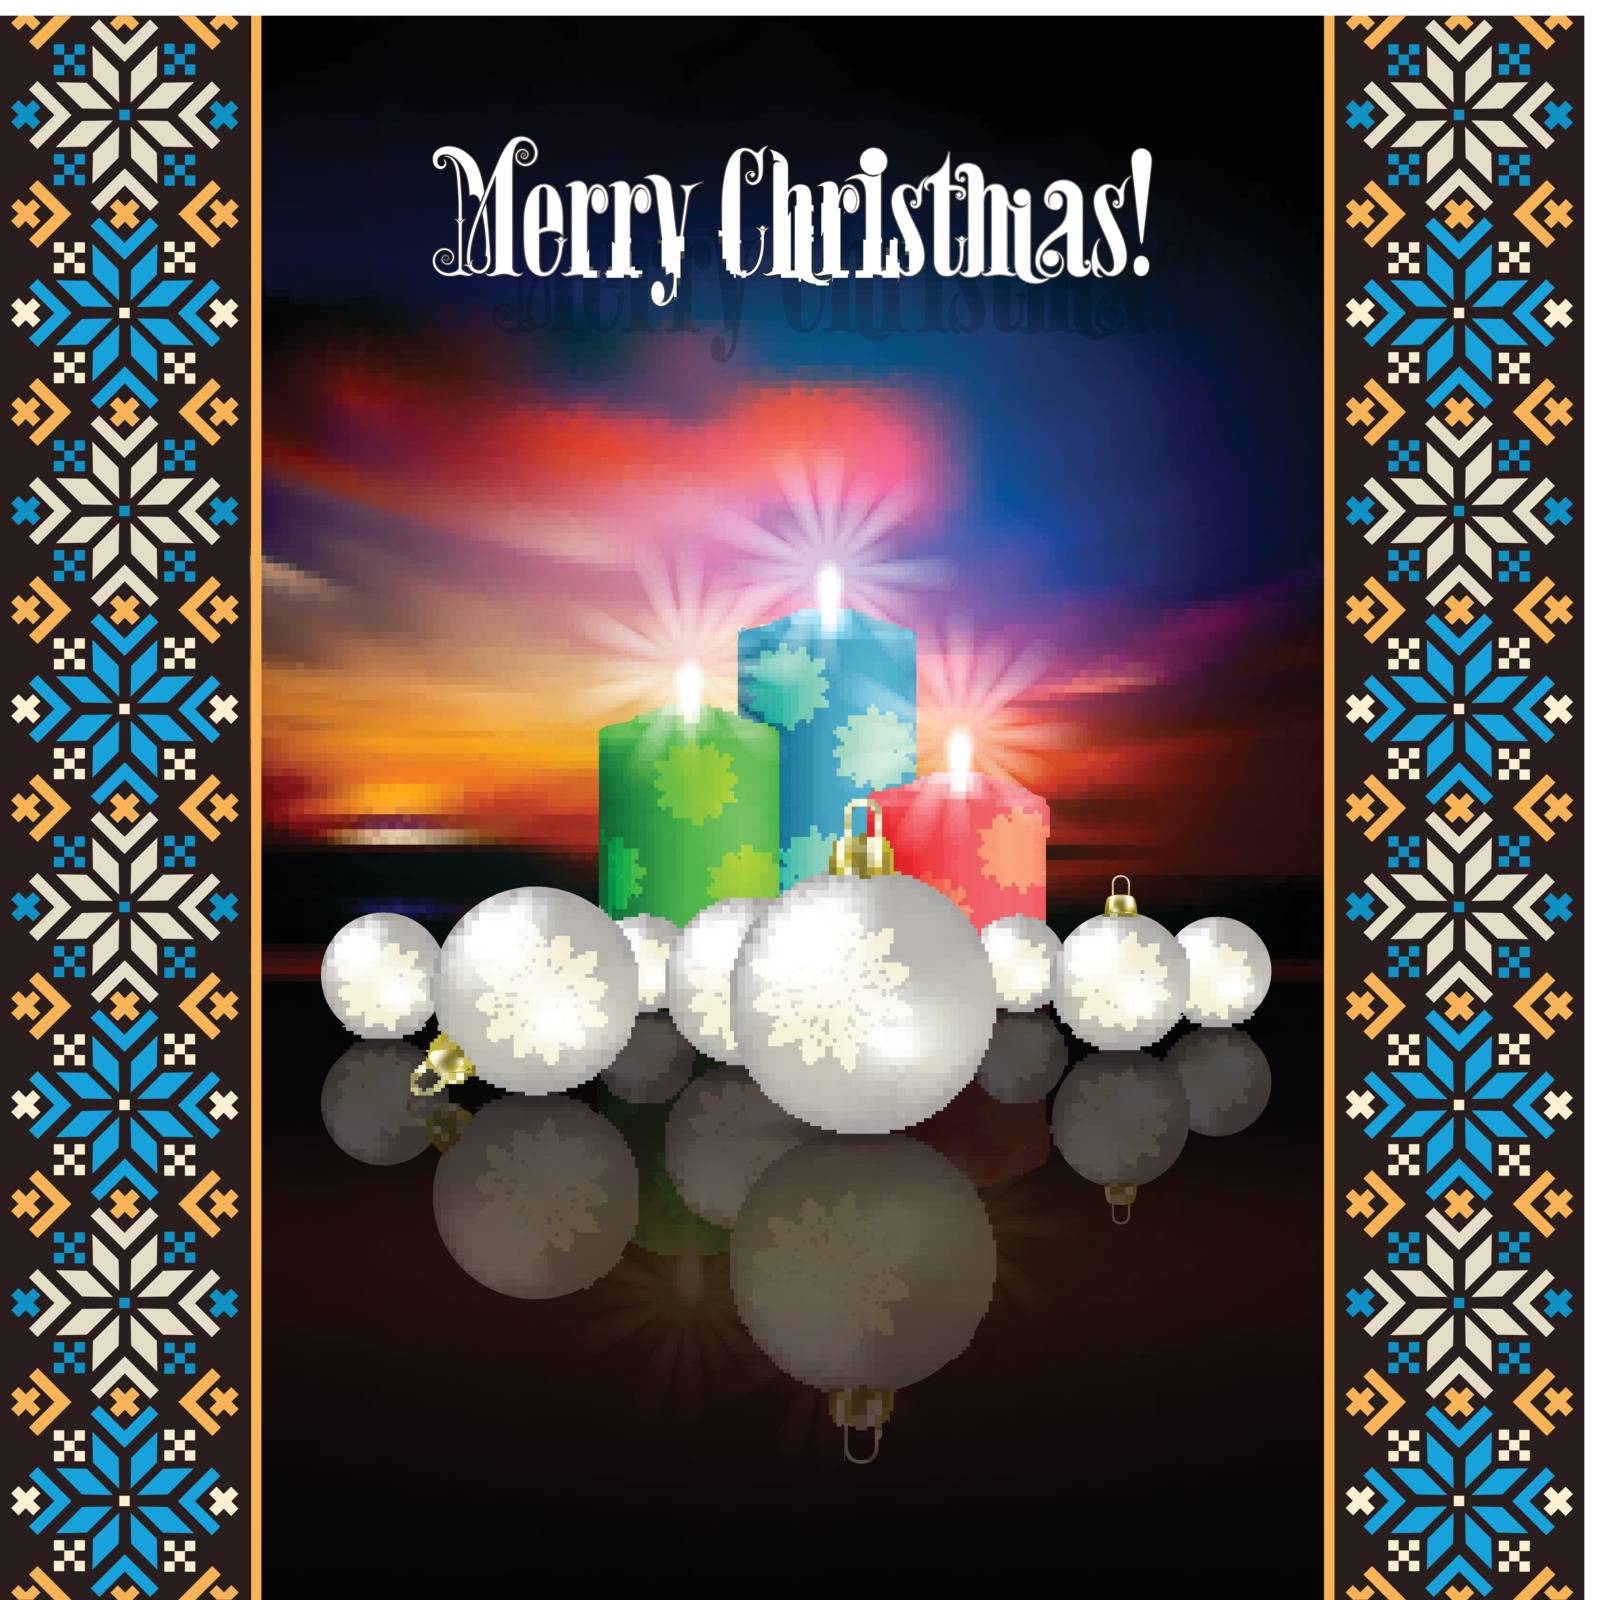 Abstract Christmas background with candles and decorations